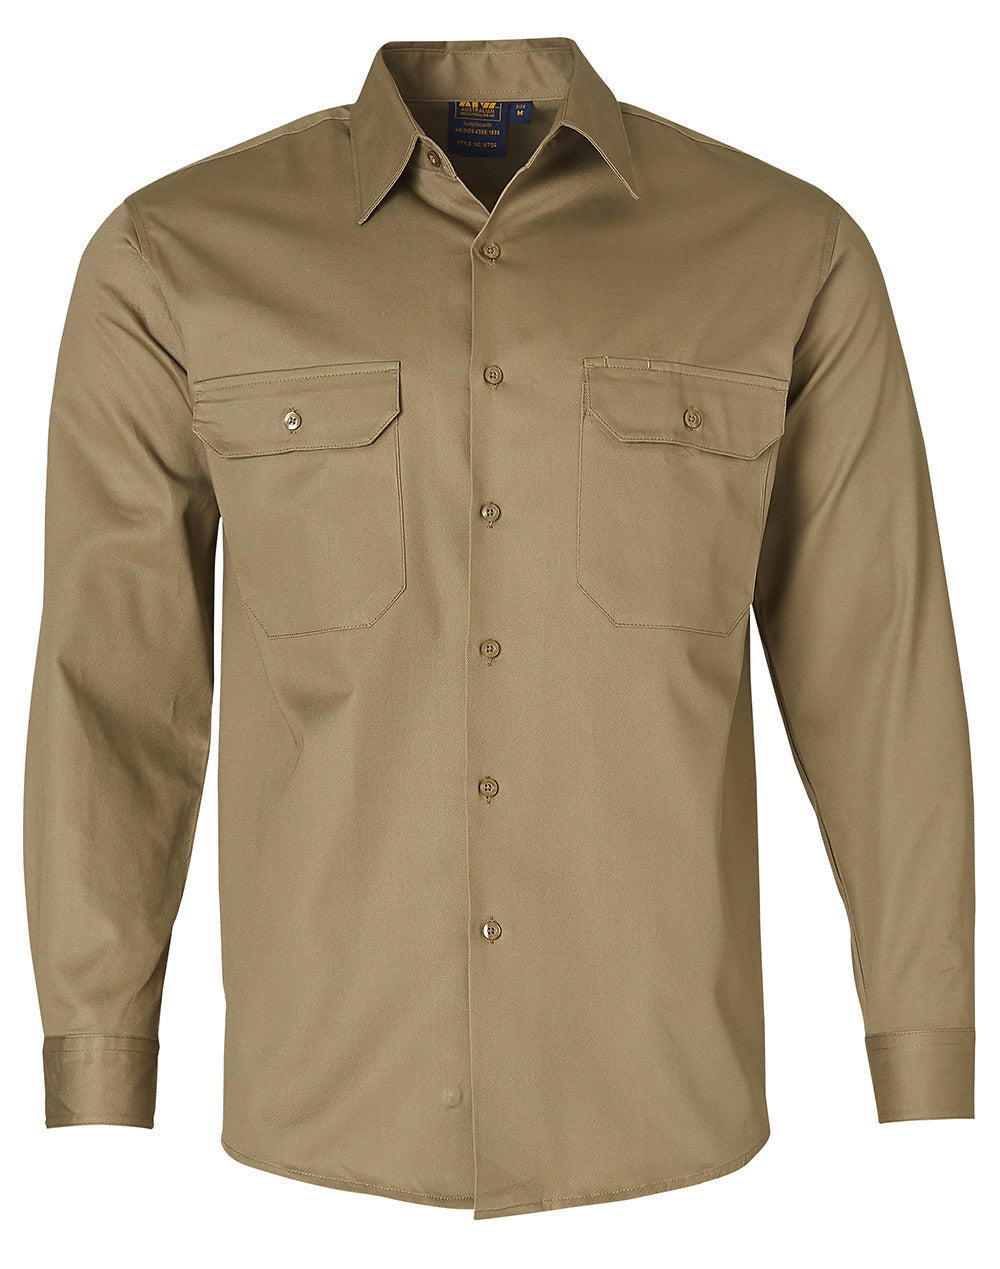 Long Sleeve Cotton Drill Shirt - made by AIW